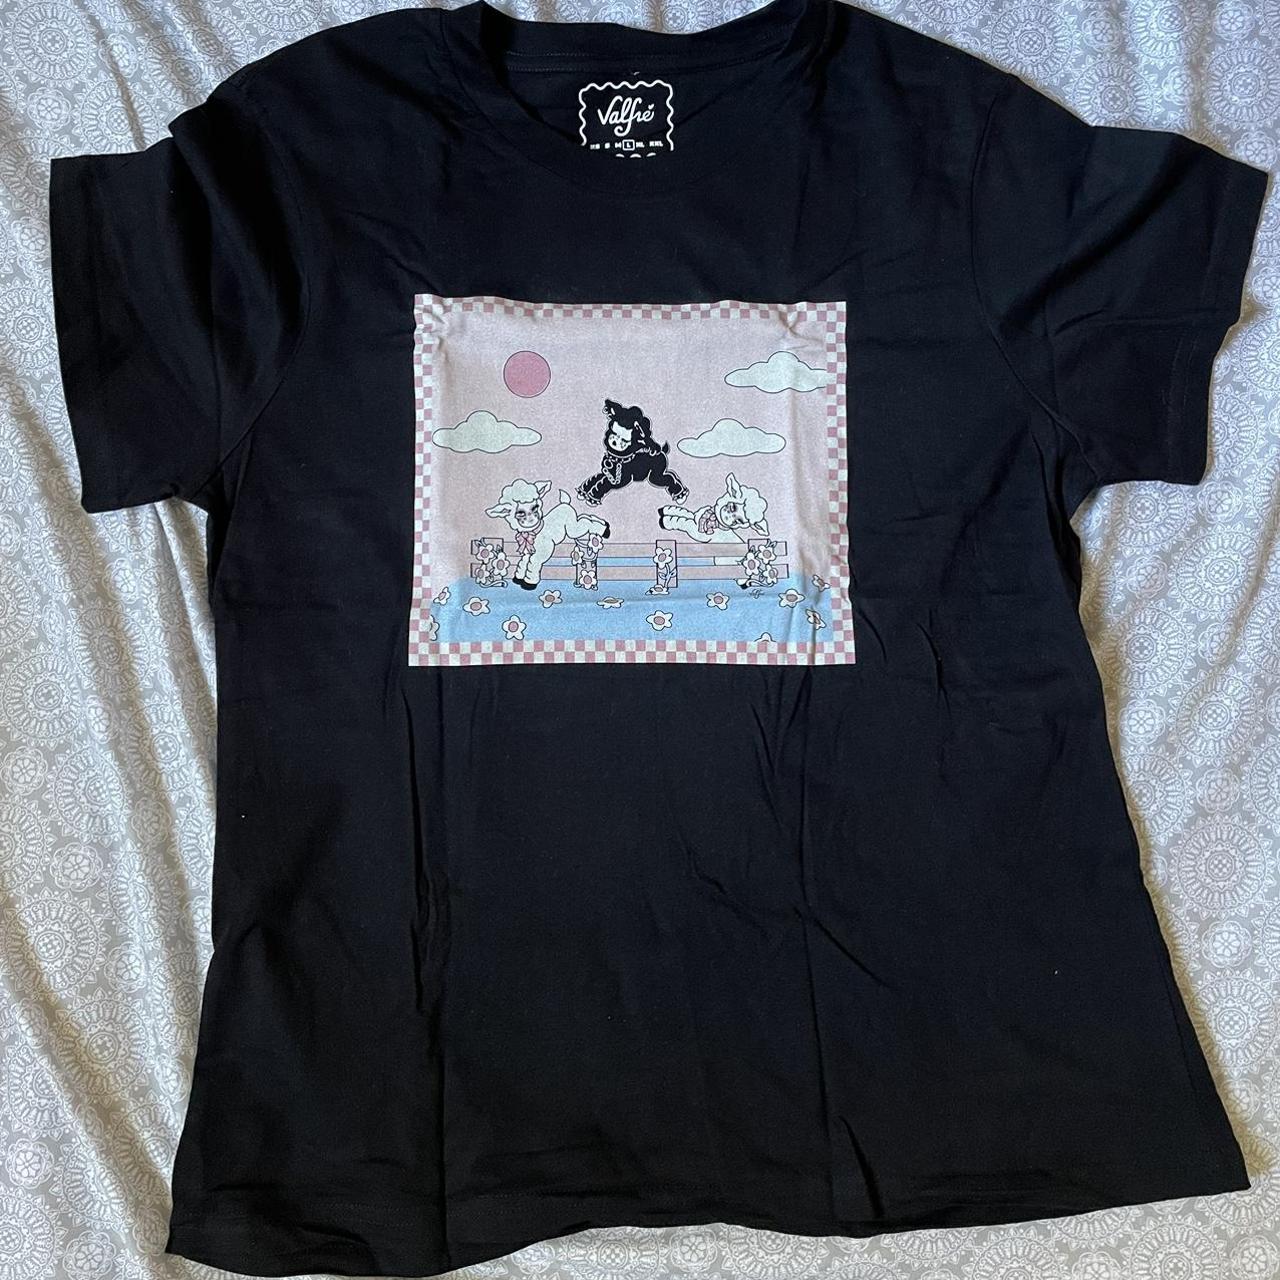 Valfre Women's Black and Pink T-shirt